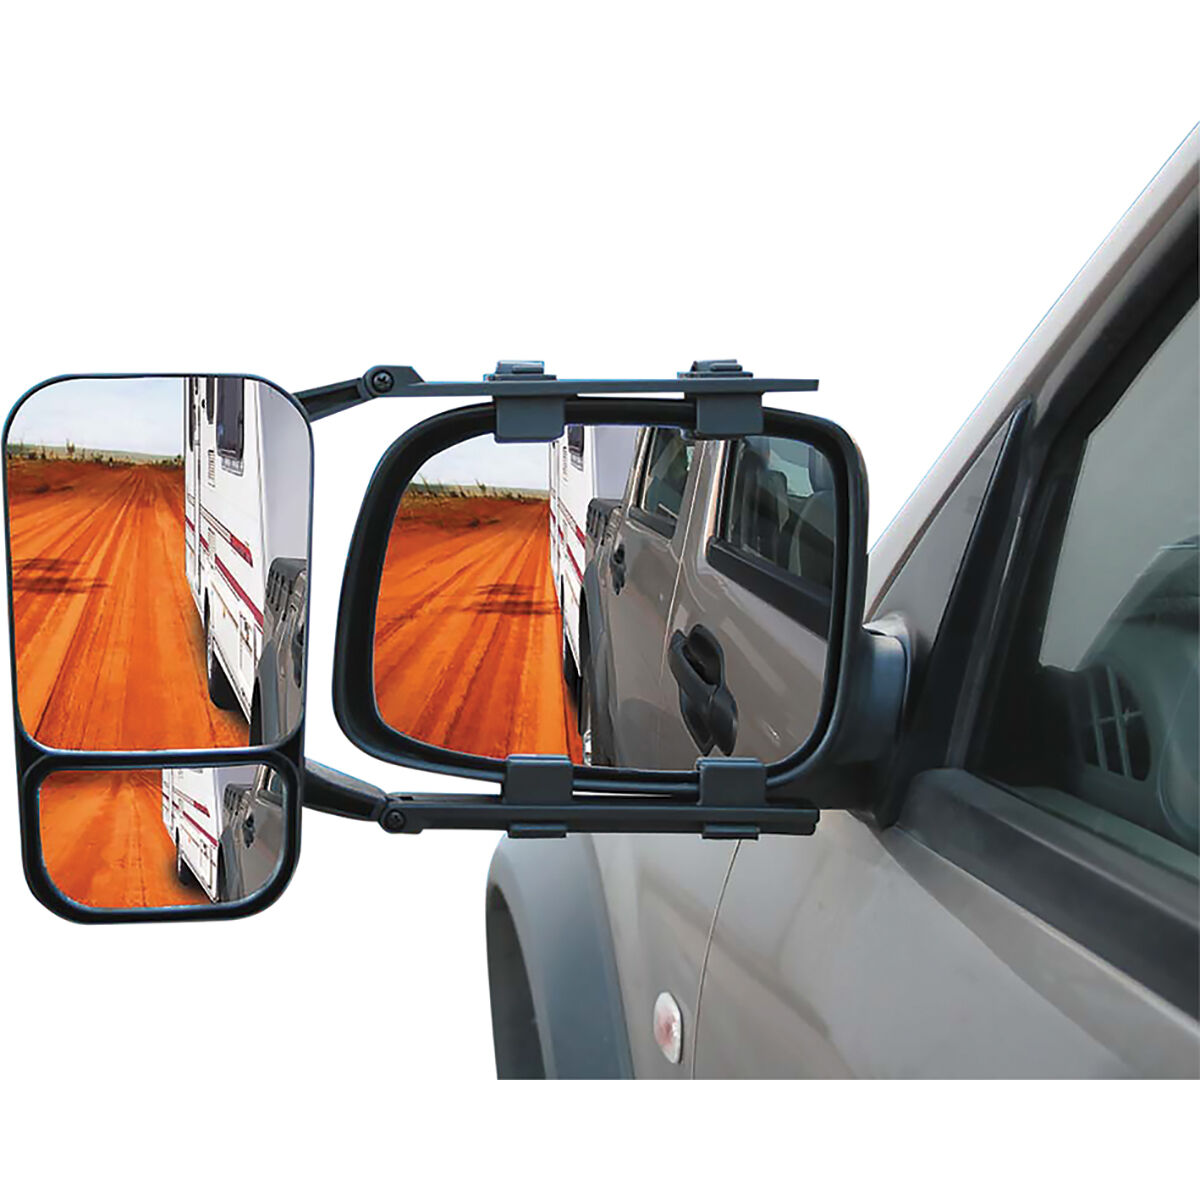 2 x Caravan Towing Mirror Extension Car Wing Mirrors for Opel Vauxhall Astra All Models 